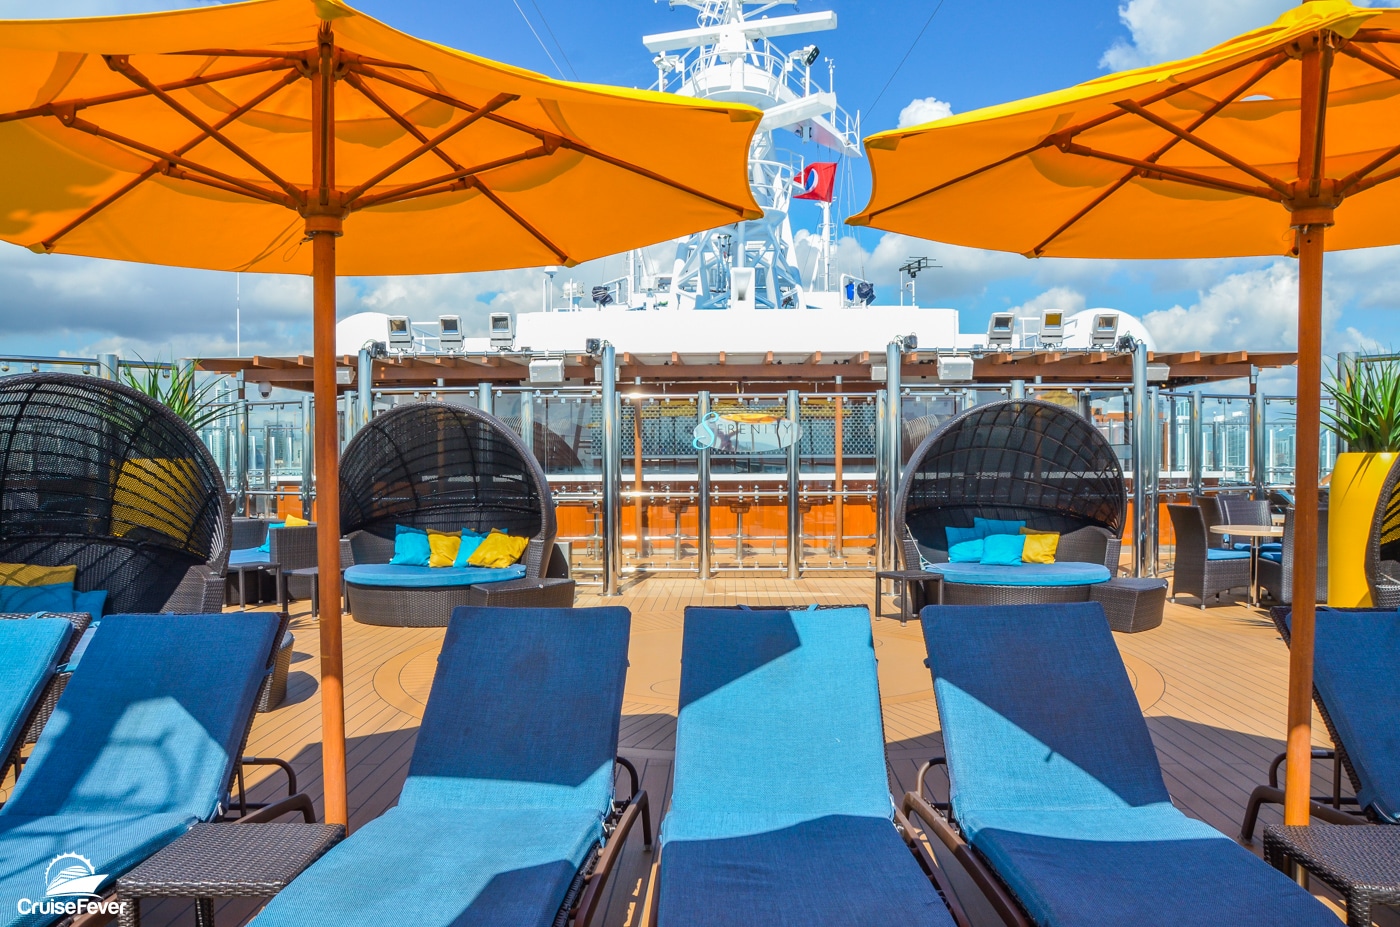 loungers and umbrellas on pool deck of Carnival Horizon cruise ship